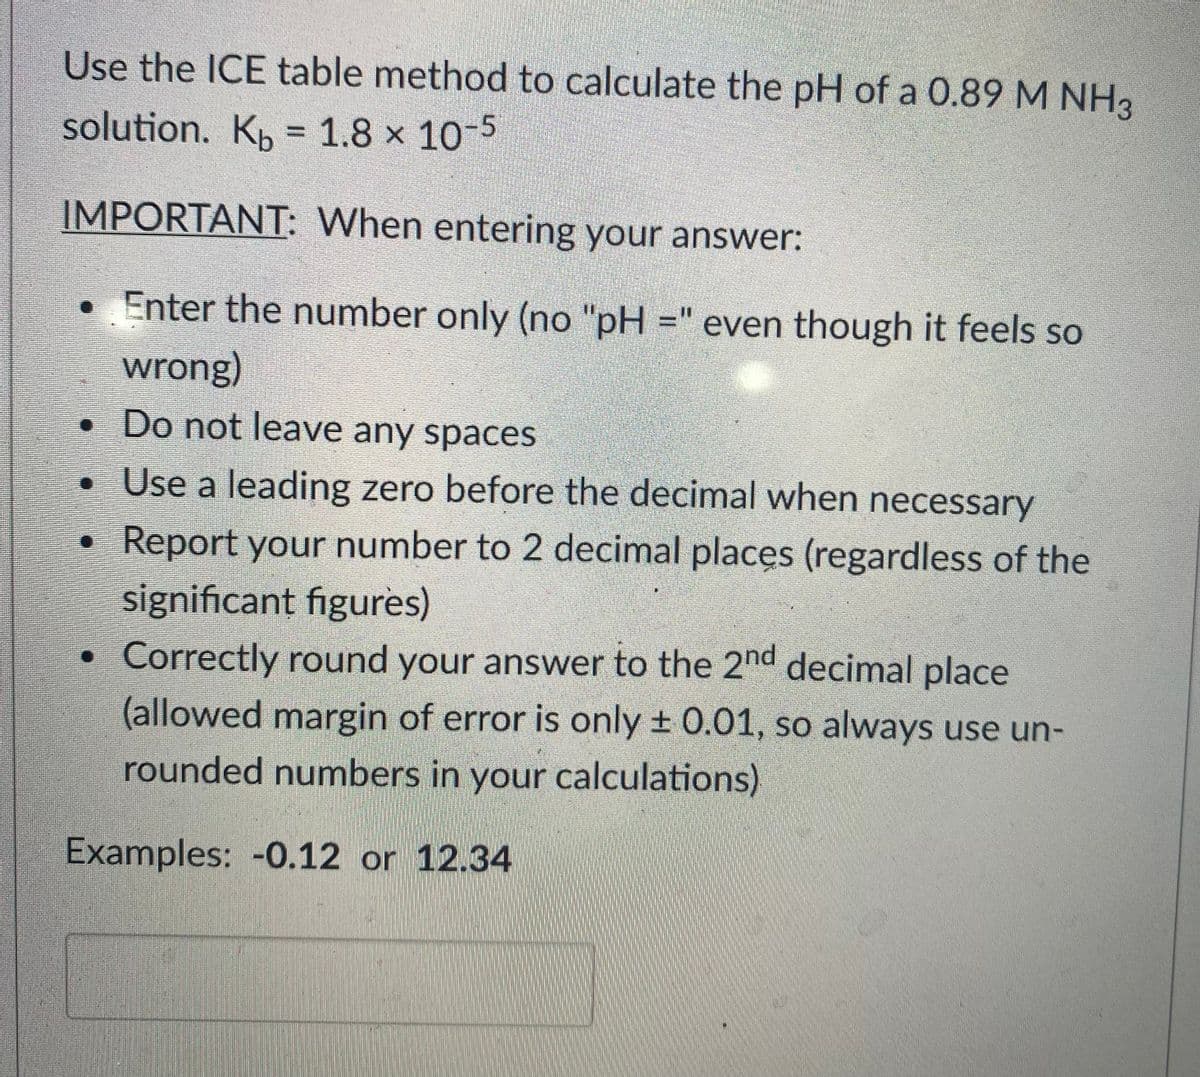 Use the ICE table method to calculate the pH of a 0.89 M NH3
solution. K, = 1.8 × 10-5
IMPORTANT: When entering your answer:
• Enter the number only (no "pH =" even though it feels so
wrong)
• Do not leave any spaces
• Use a leading zero before the decimal when necessary
Report your number to 2 decimal places (regardless of the
significant figures)
Correctly round your answer to the 2nd decimal place
(allowed margin of error is only + 0.01, so always use un-
rounded numbers in your calculations)
Examples: -0.12 or 12.34
